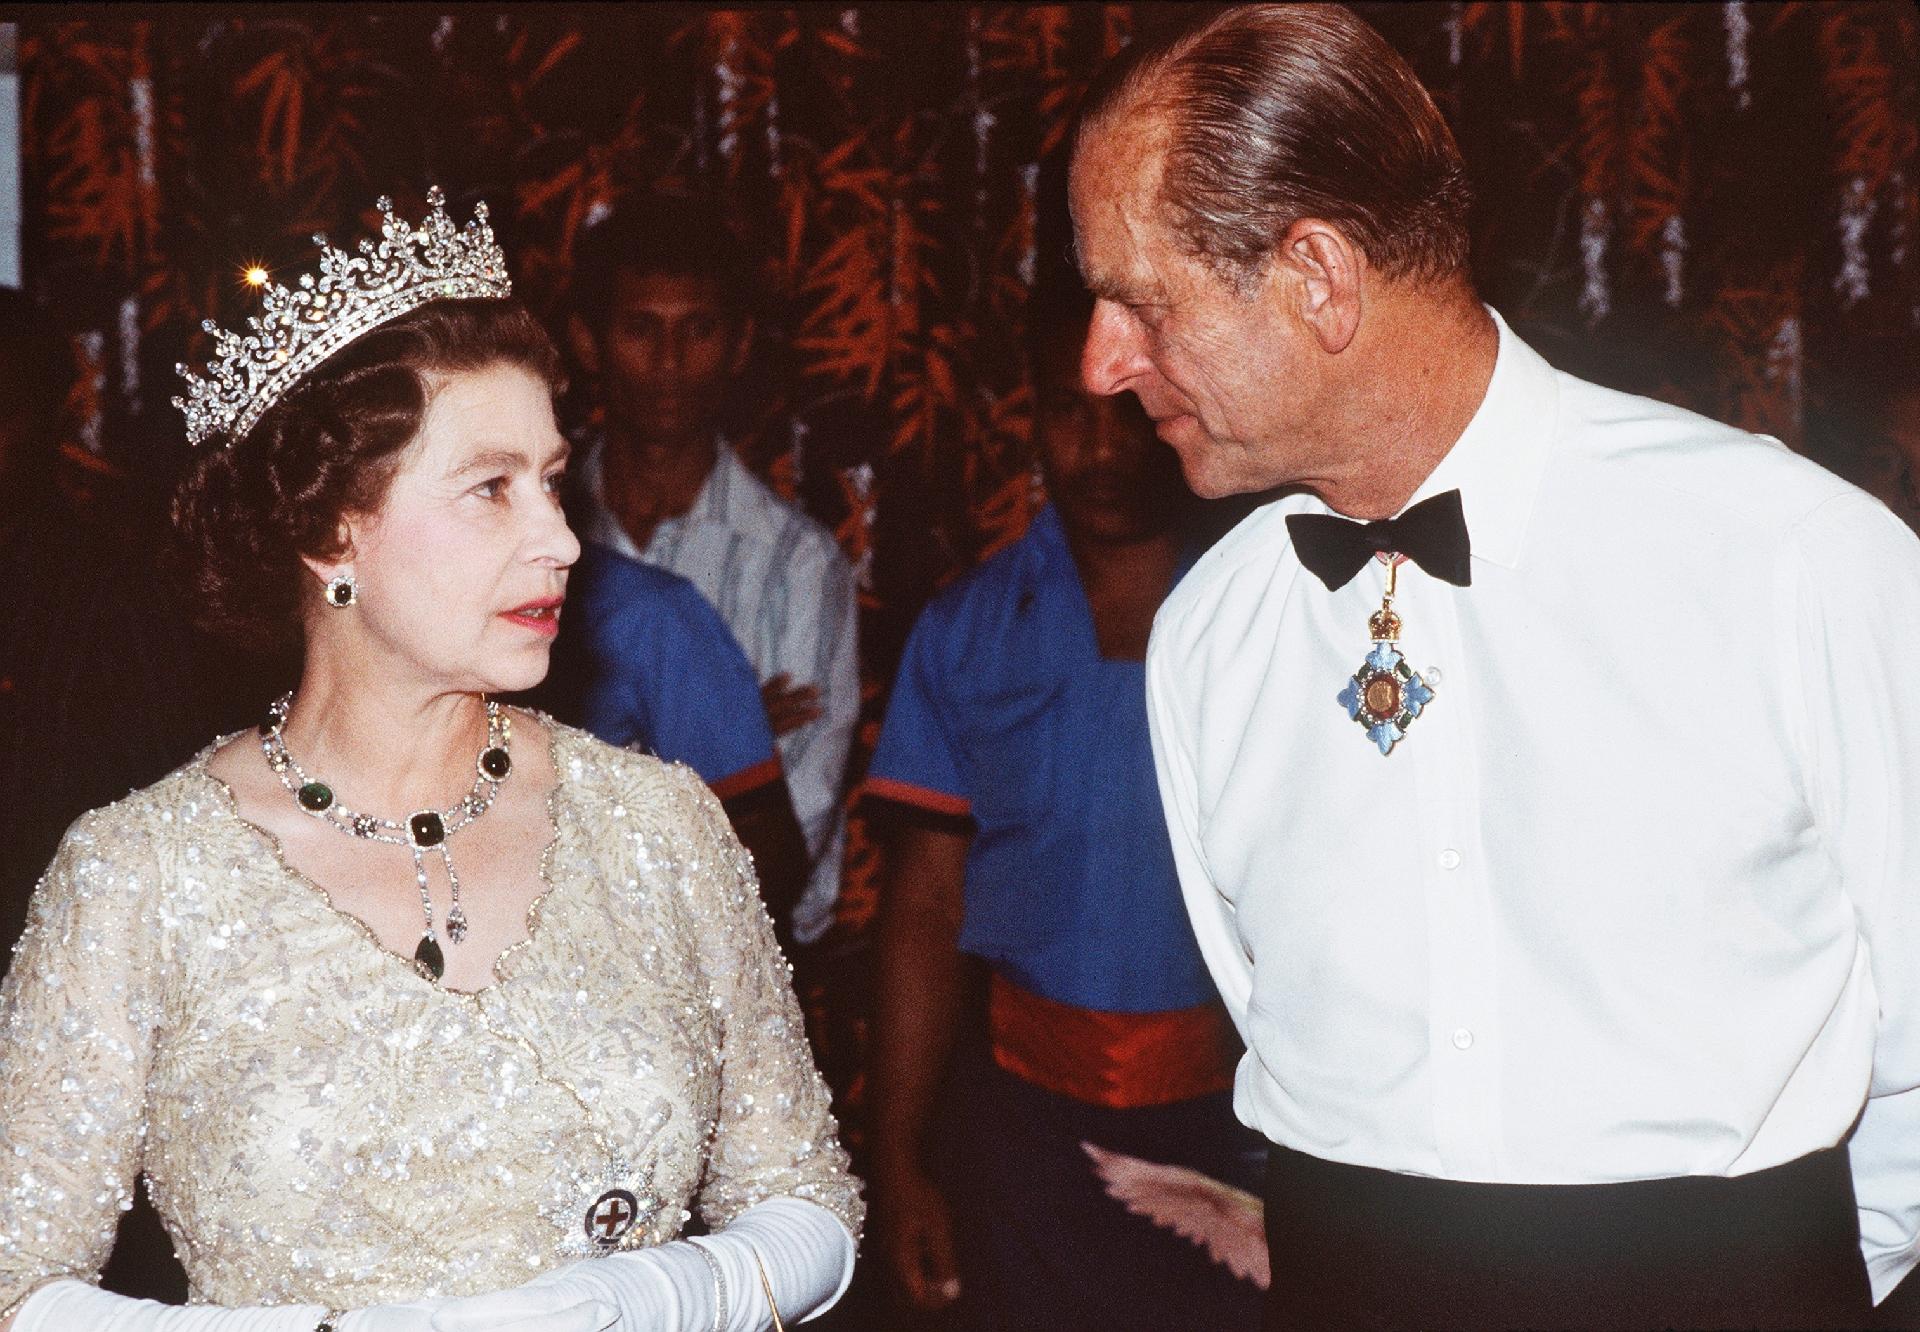 Queen Elizabeth II and Prince Philip at an exhibition in Papua New Guinea in October 1982 - Getty Images